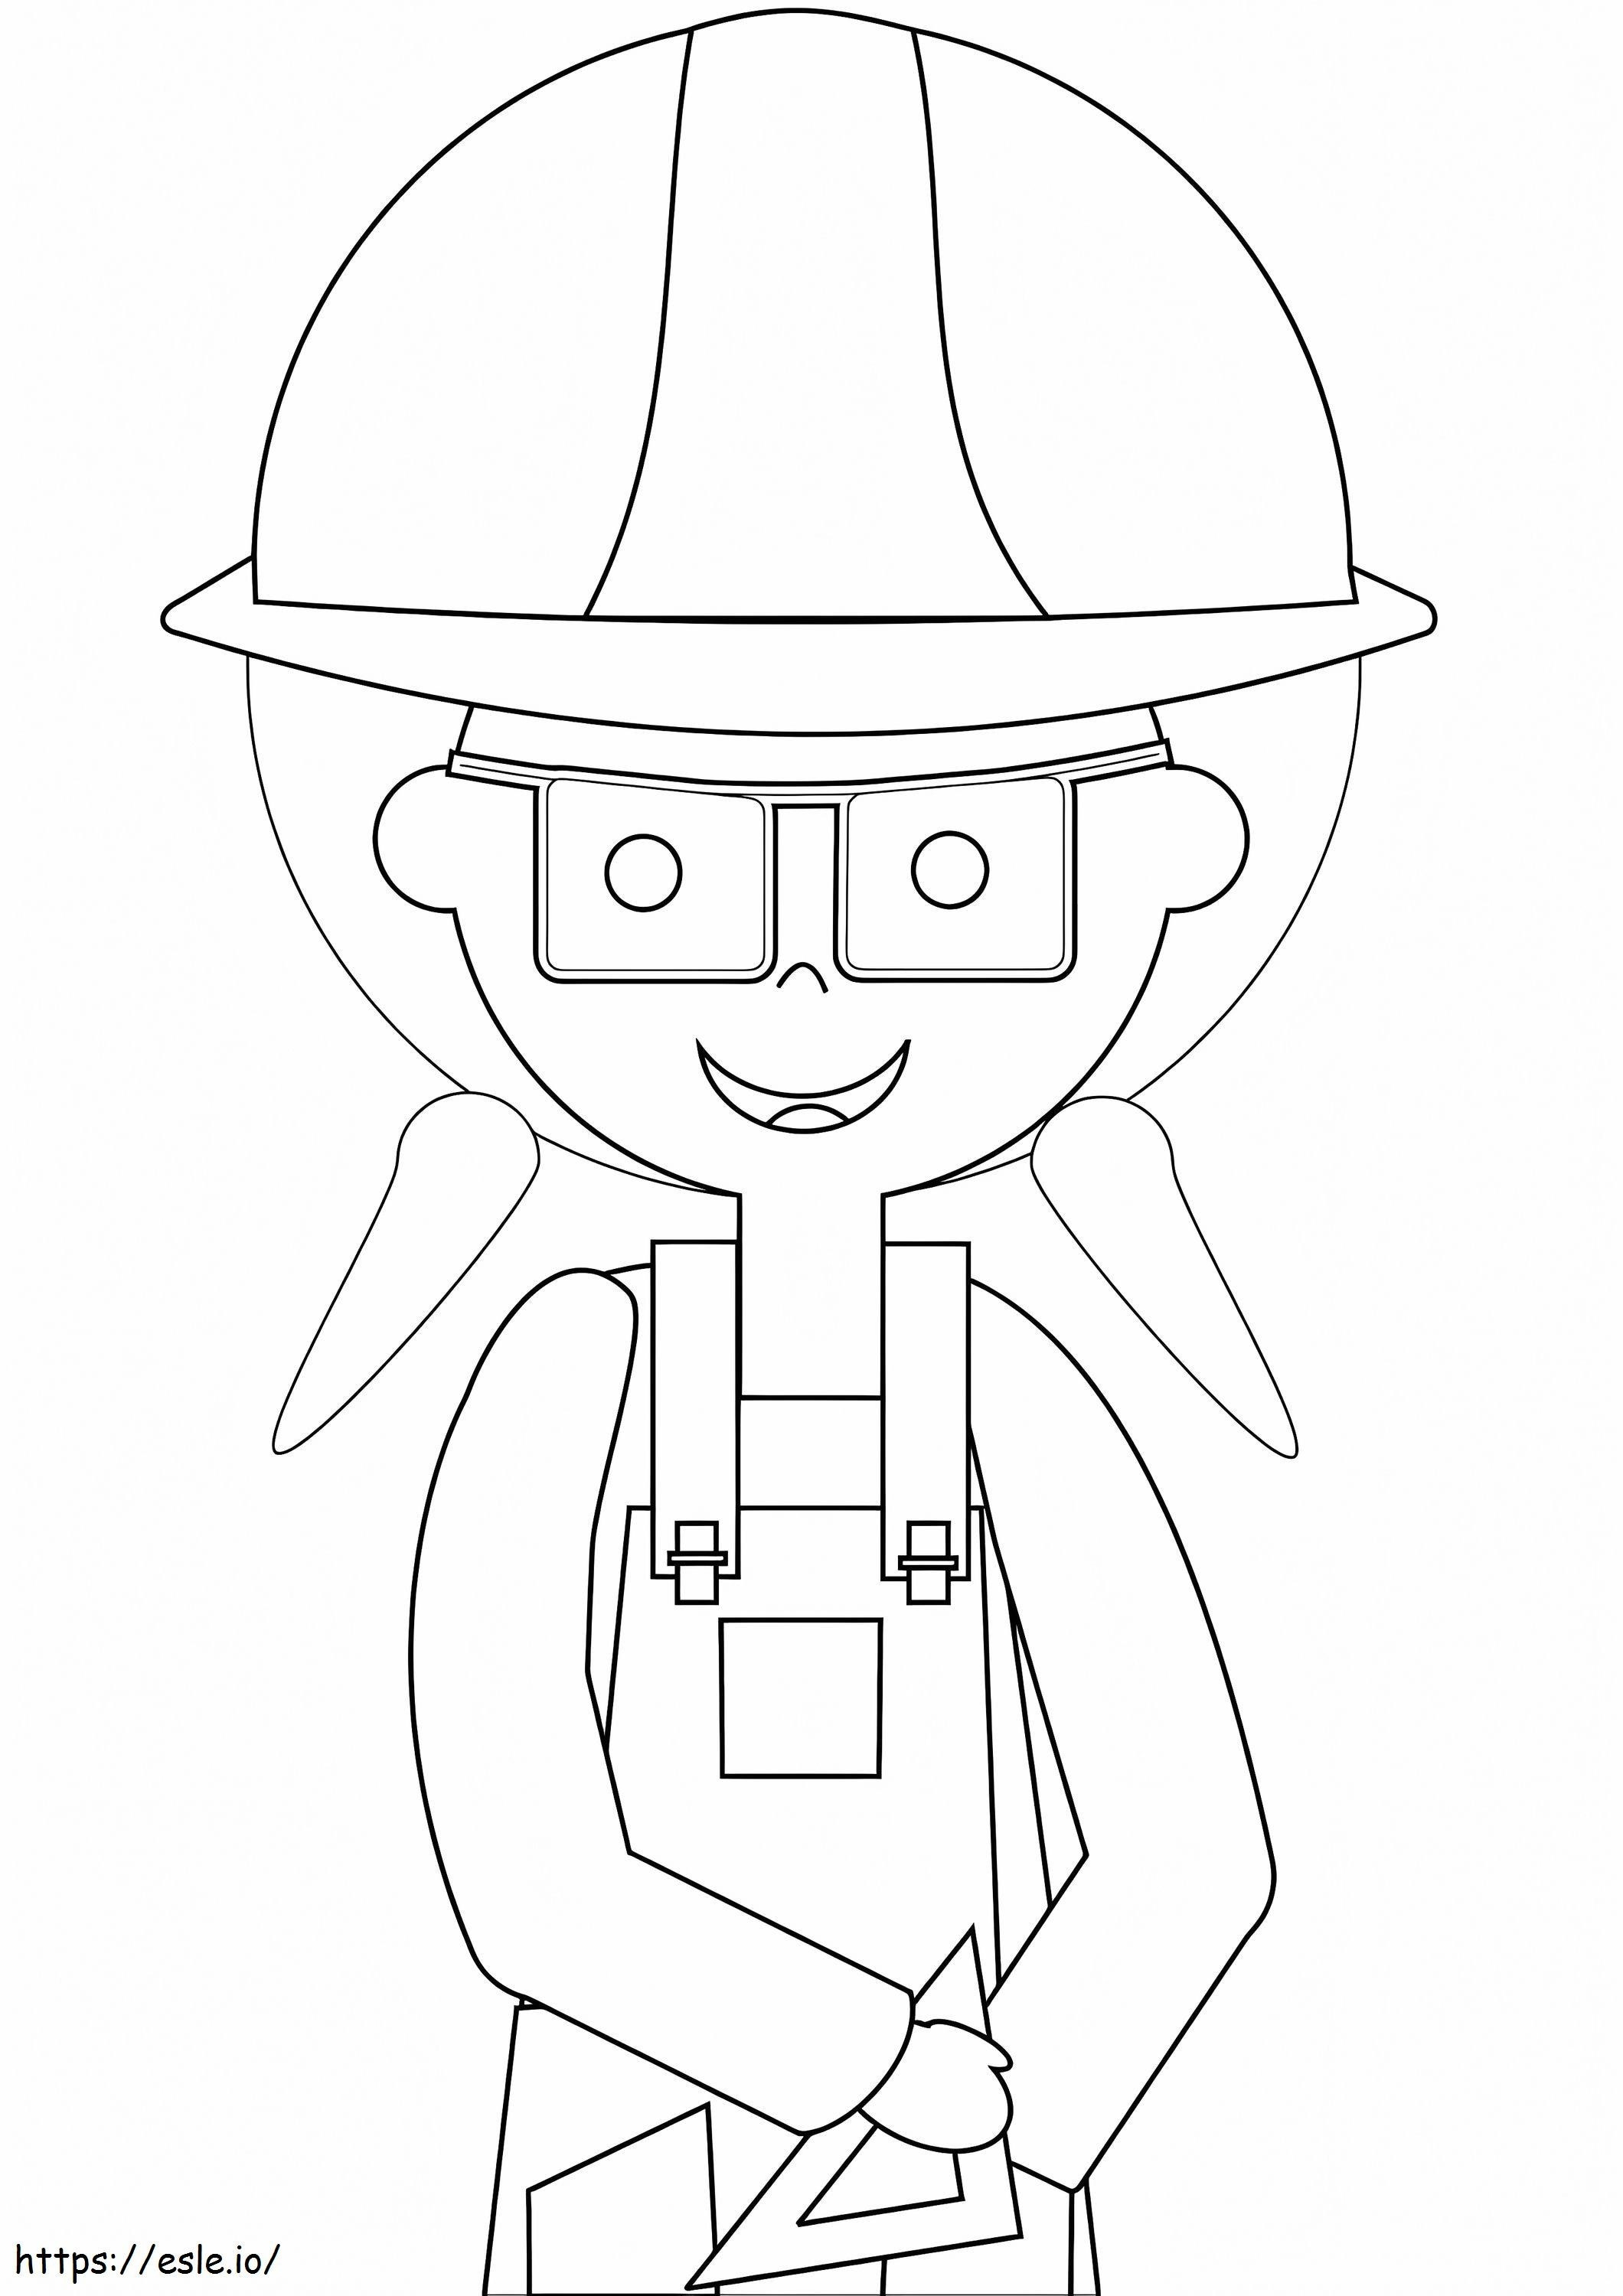 Female Construction Worker coloring page